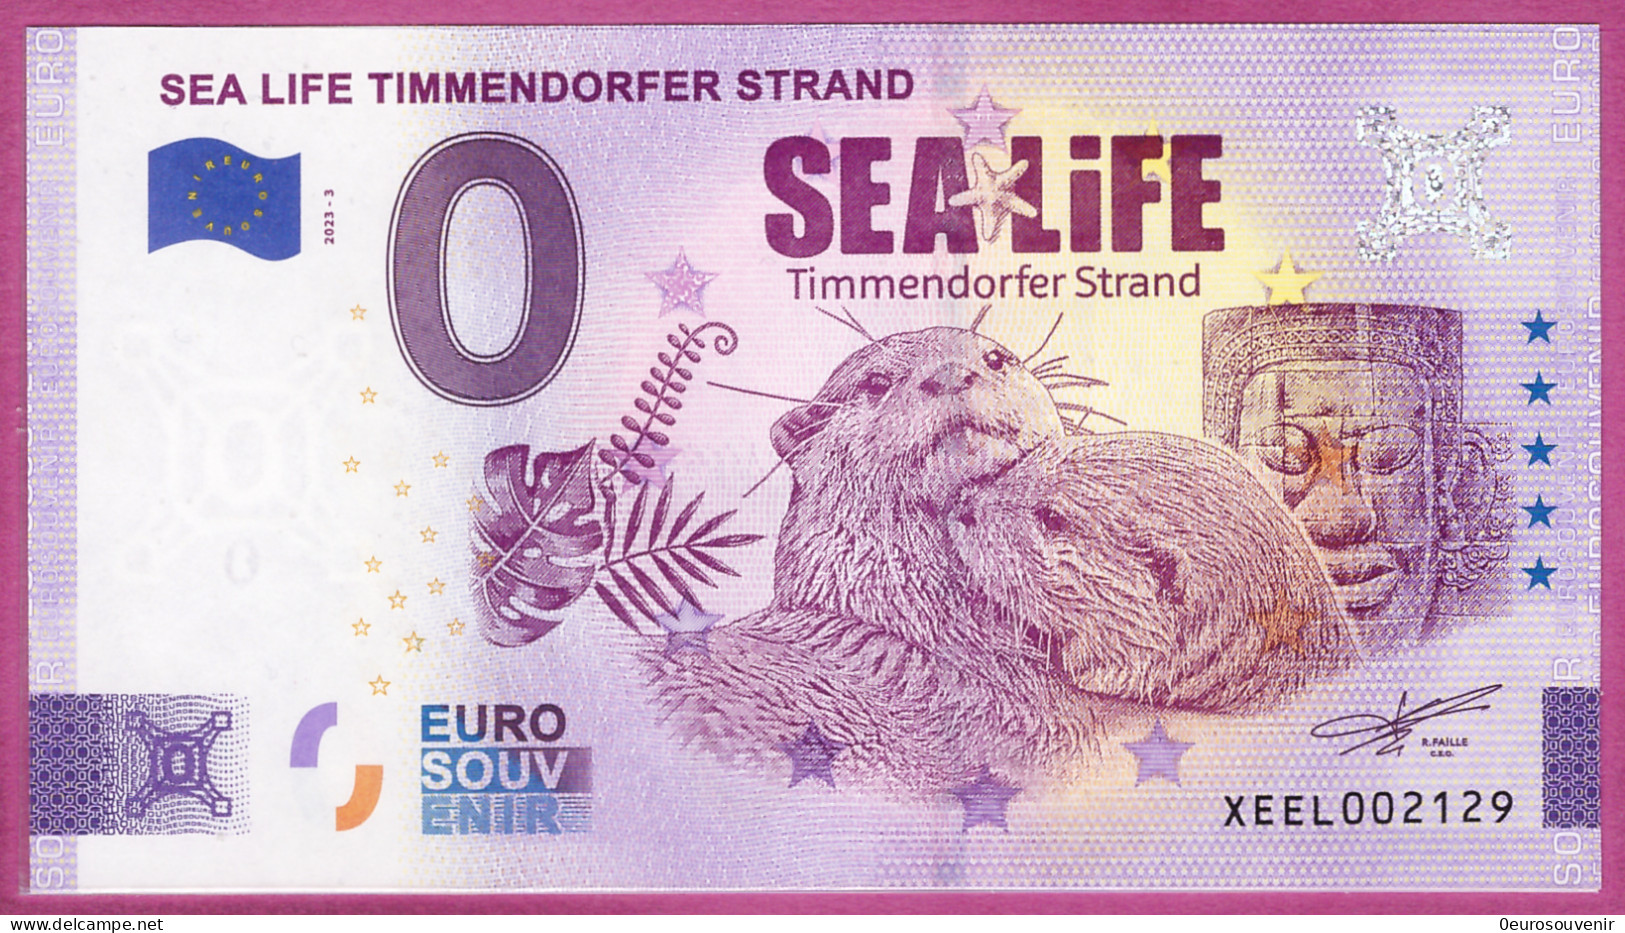 0-Euro XEEL 2023-3 SEA LIFE TIMMENDORFER STRAND - OTTER - Private Proofs / Unofficial